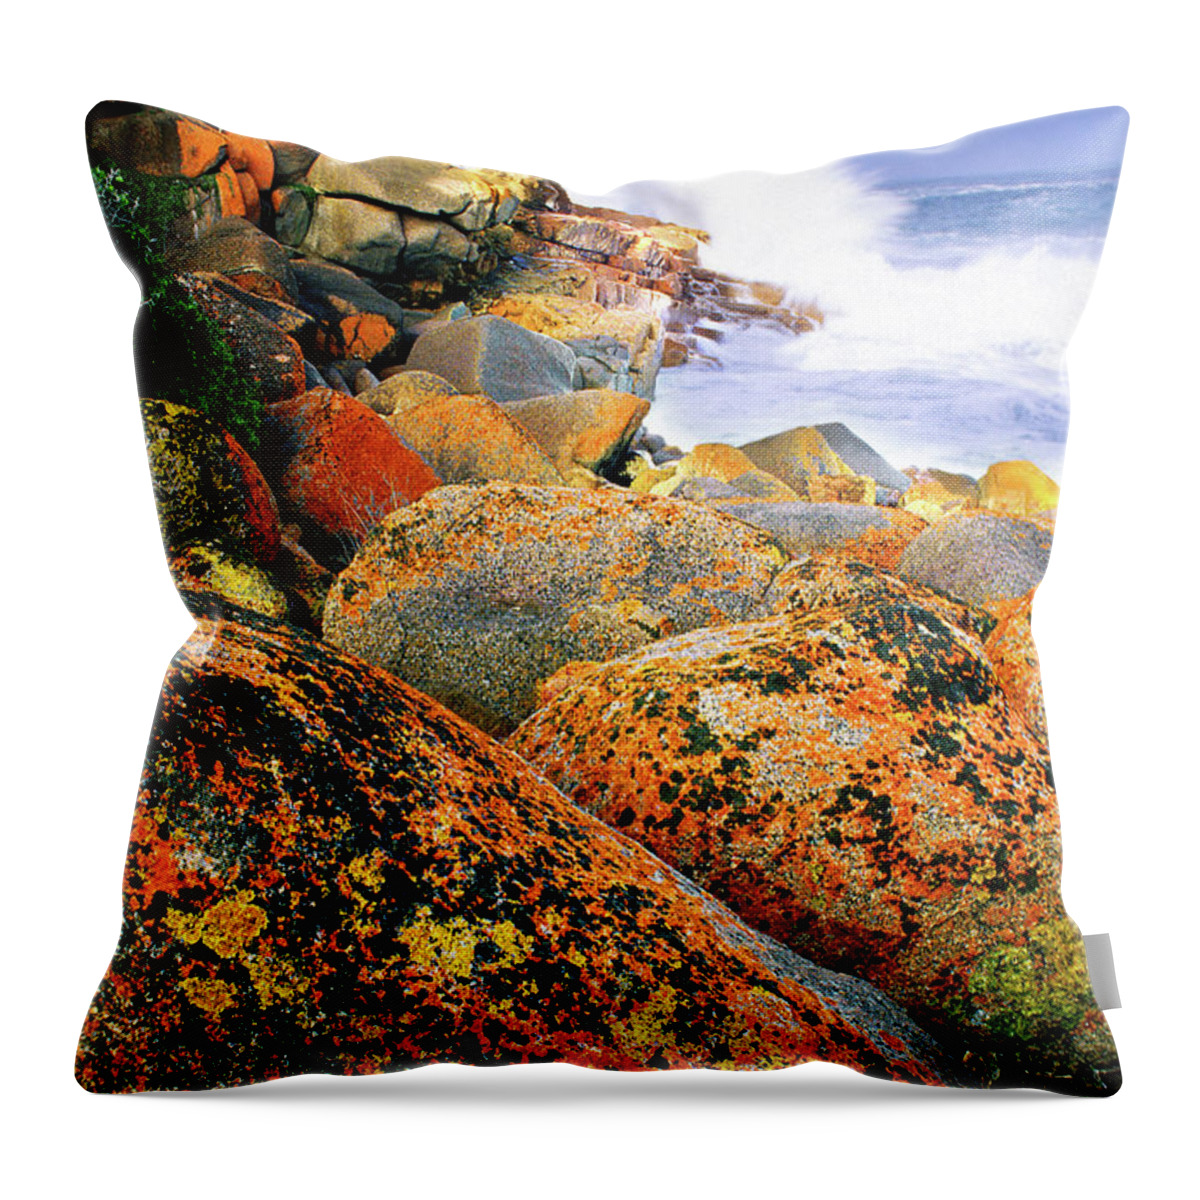 Multi-color Throw Pillow featuring the photograph Multicolor Rocks by Ted Keller